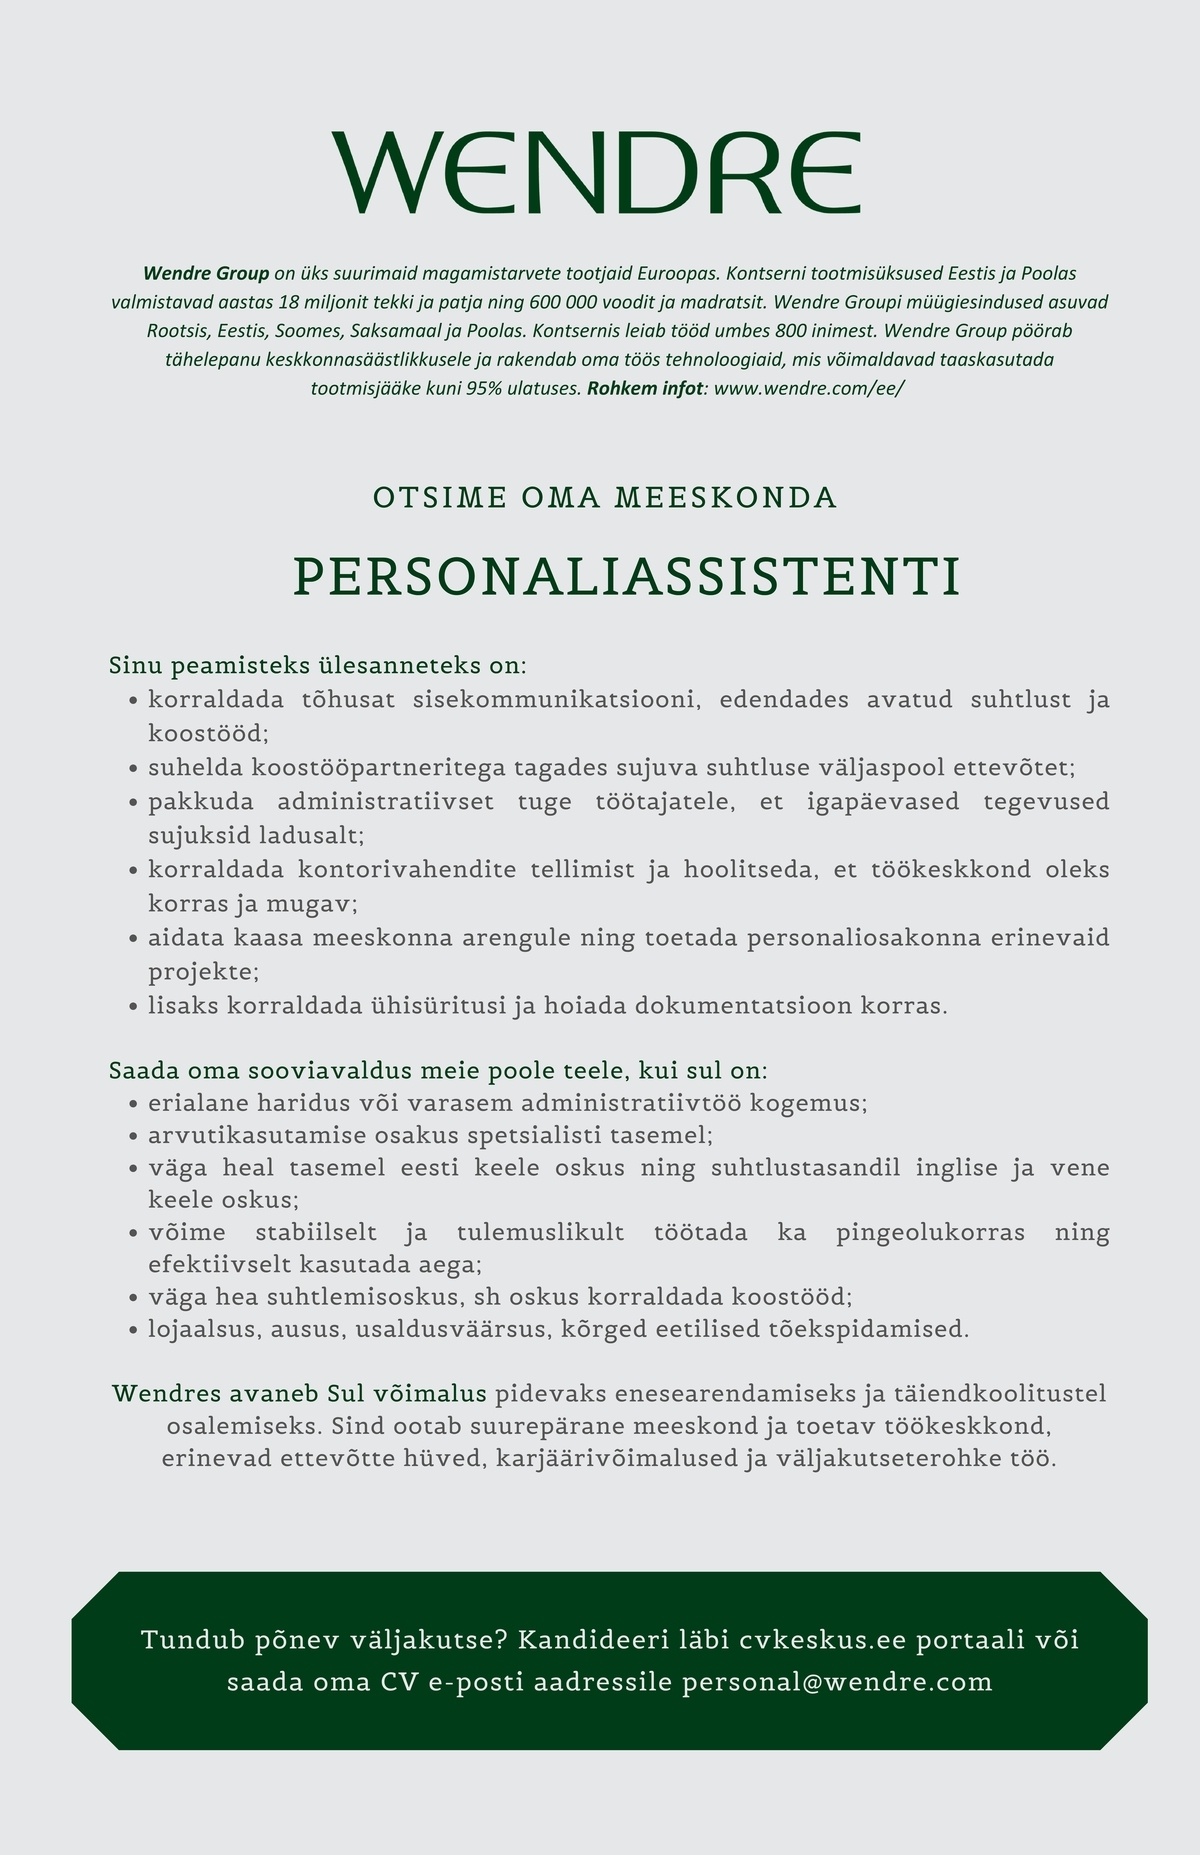 Wendre AS PERSONALIASSISTENT